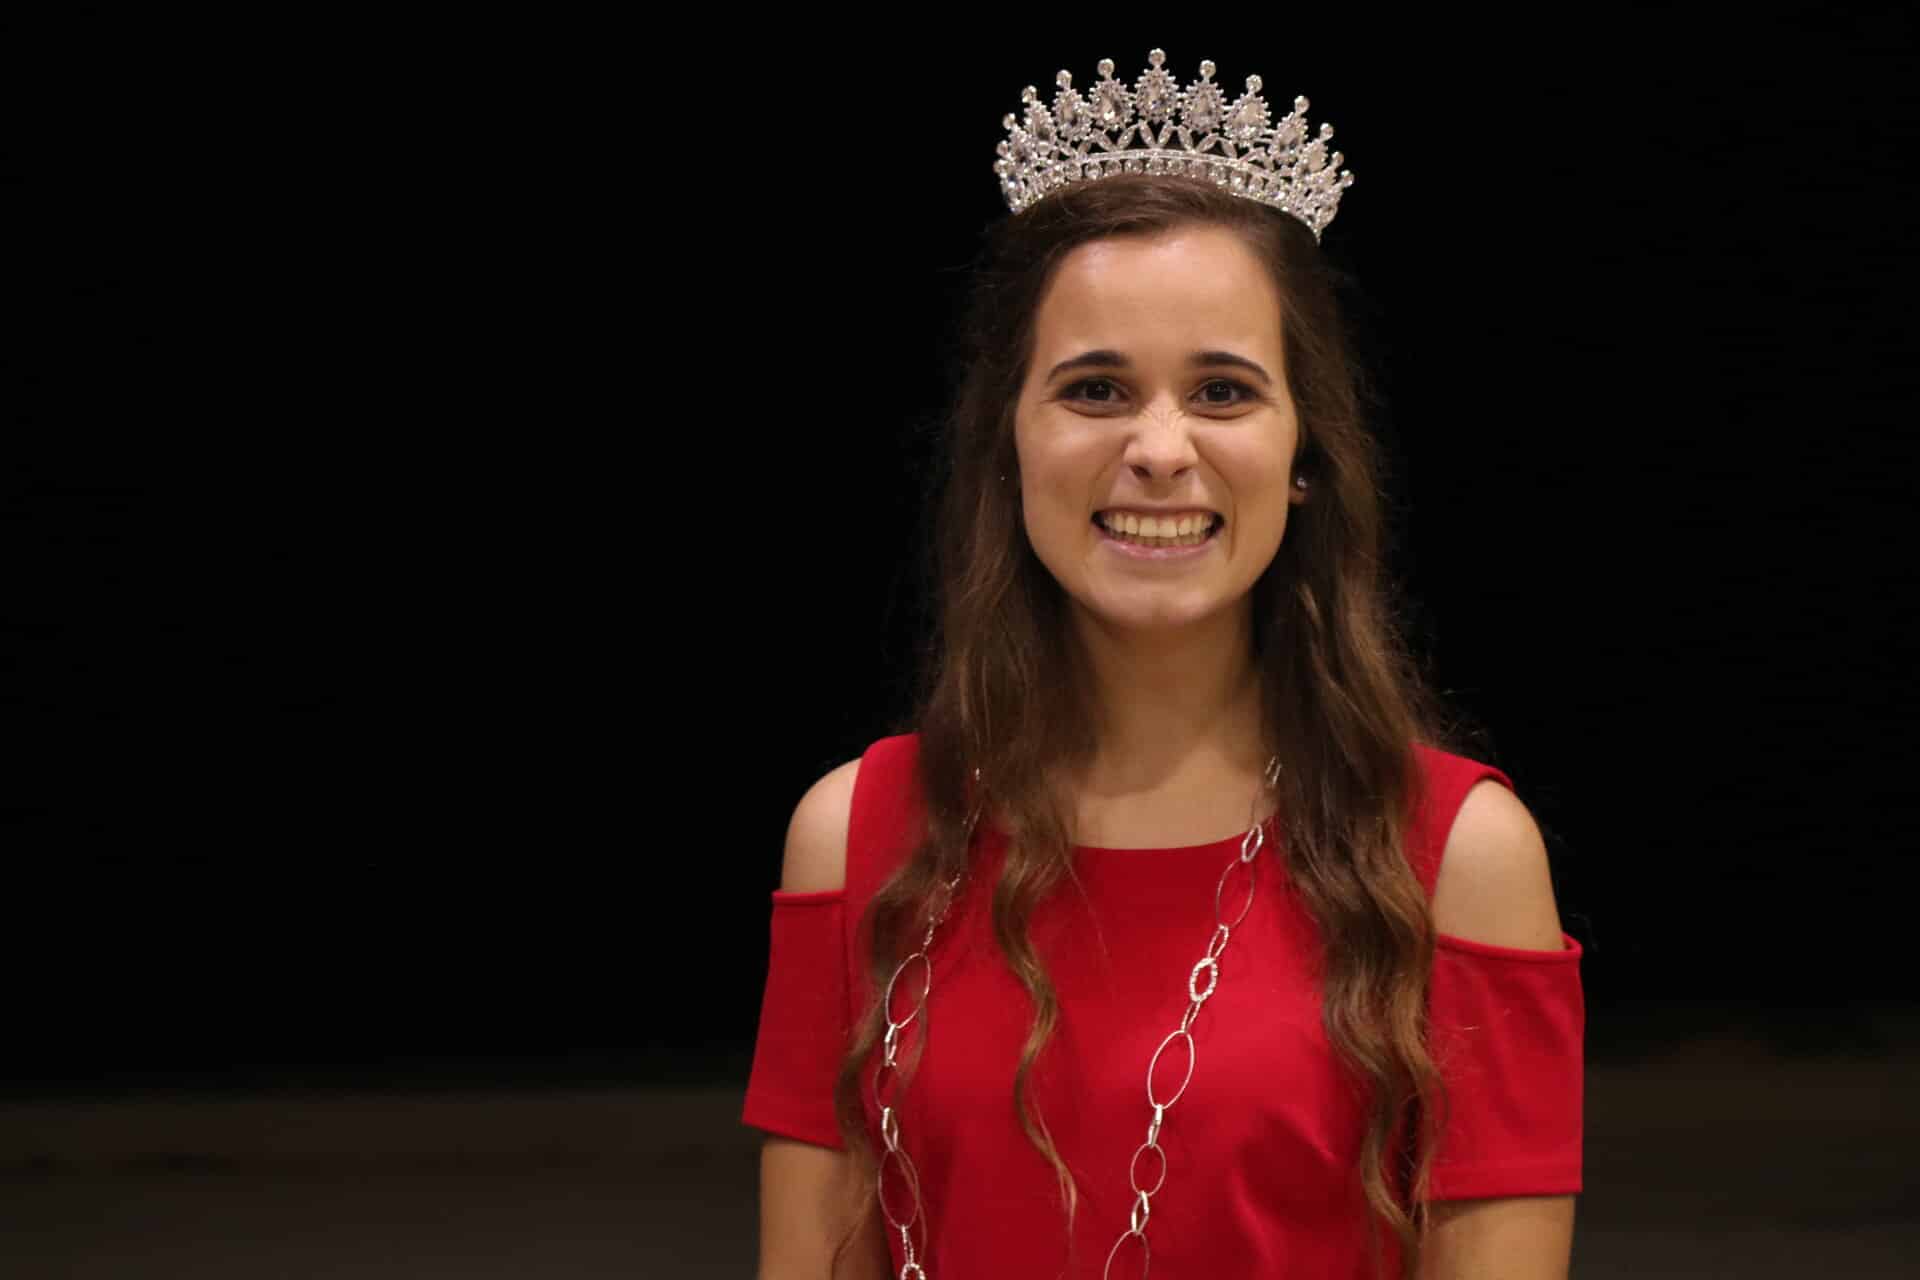 Lauren Hawthorn, senior elementary education major represents Residence Life in the homecoming court of 2020 and is crowned Homecoming Queen. Lauren wears the familiar Crusader red for the homecoming announcement.